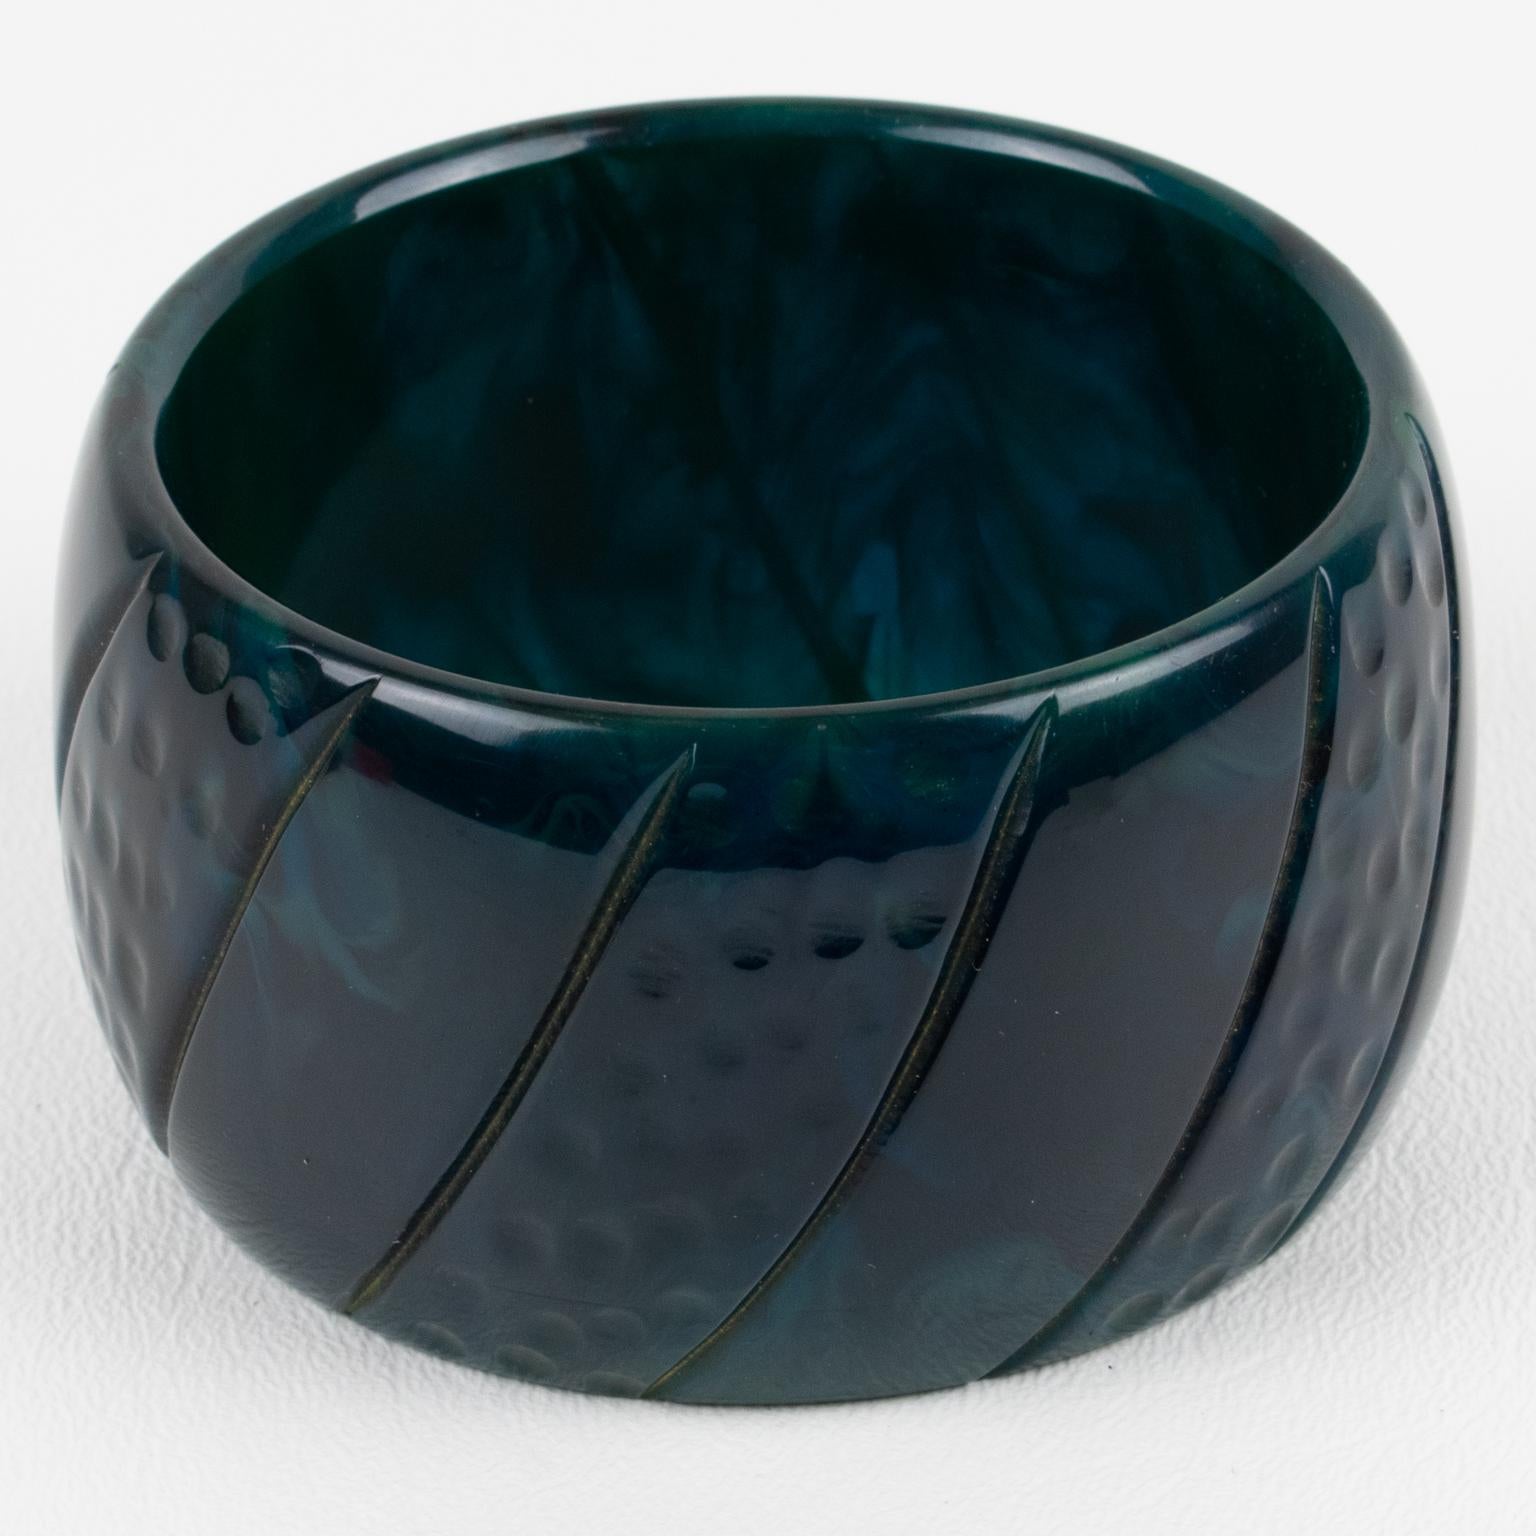 This is a superb stormy blue marble Bakelite carved bracelet bangle. It features a chunky oversized domed shape with a geometric carving design all around. The color is an intense deep navy blue tone with green and light blue swirling.